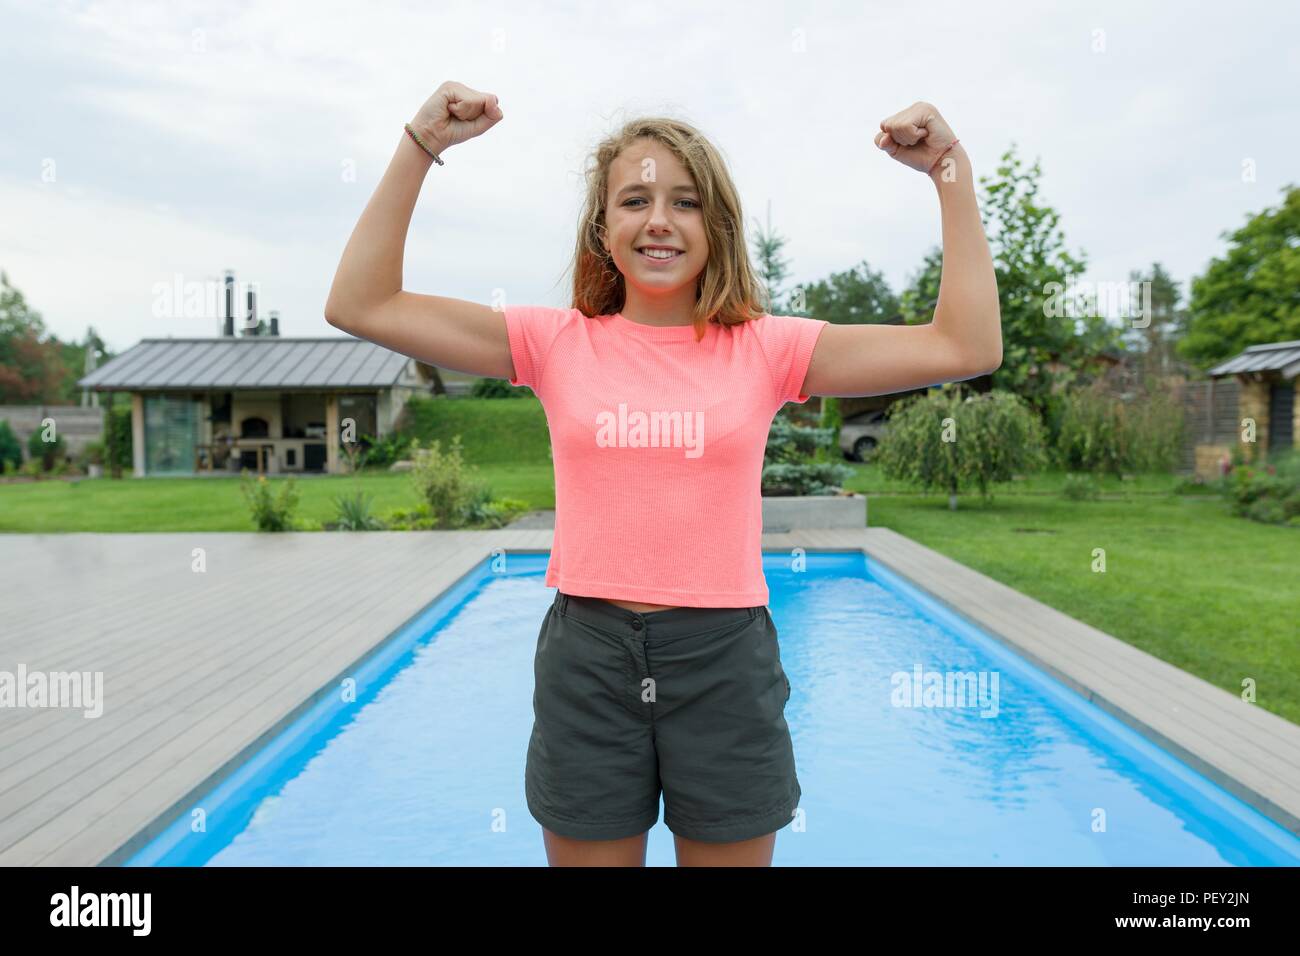 People, power, stamina, strength, health, sport, fitness concept. Outdoor portrait smiling teenage girl showing muscles, background swimming pool gree Stock Photo